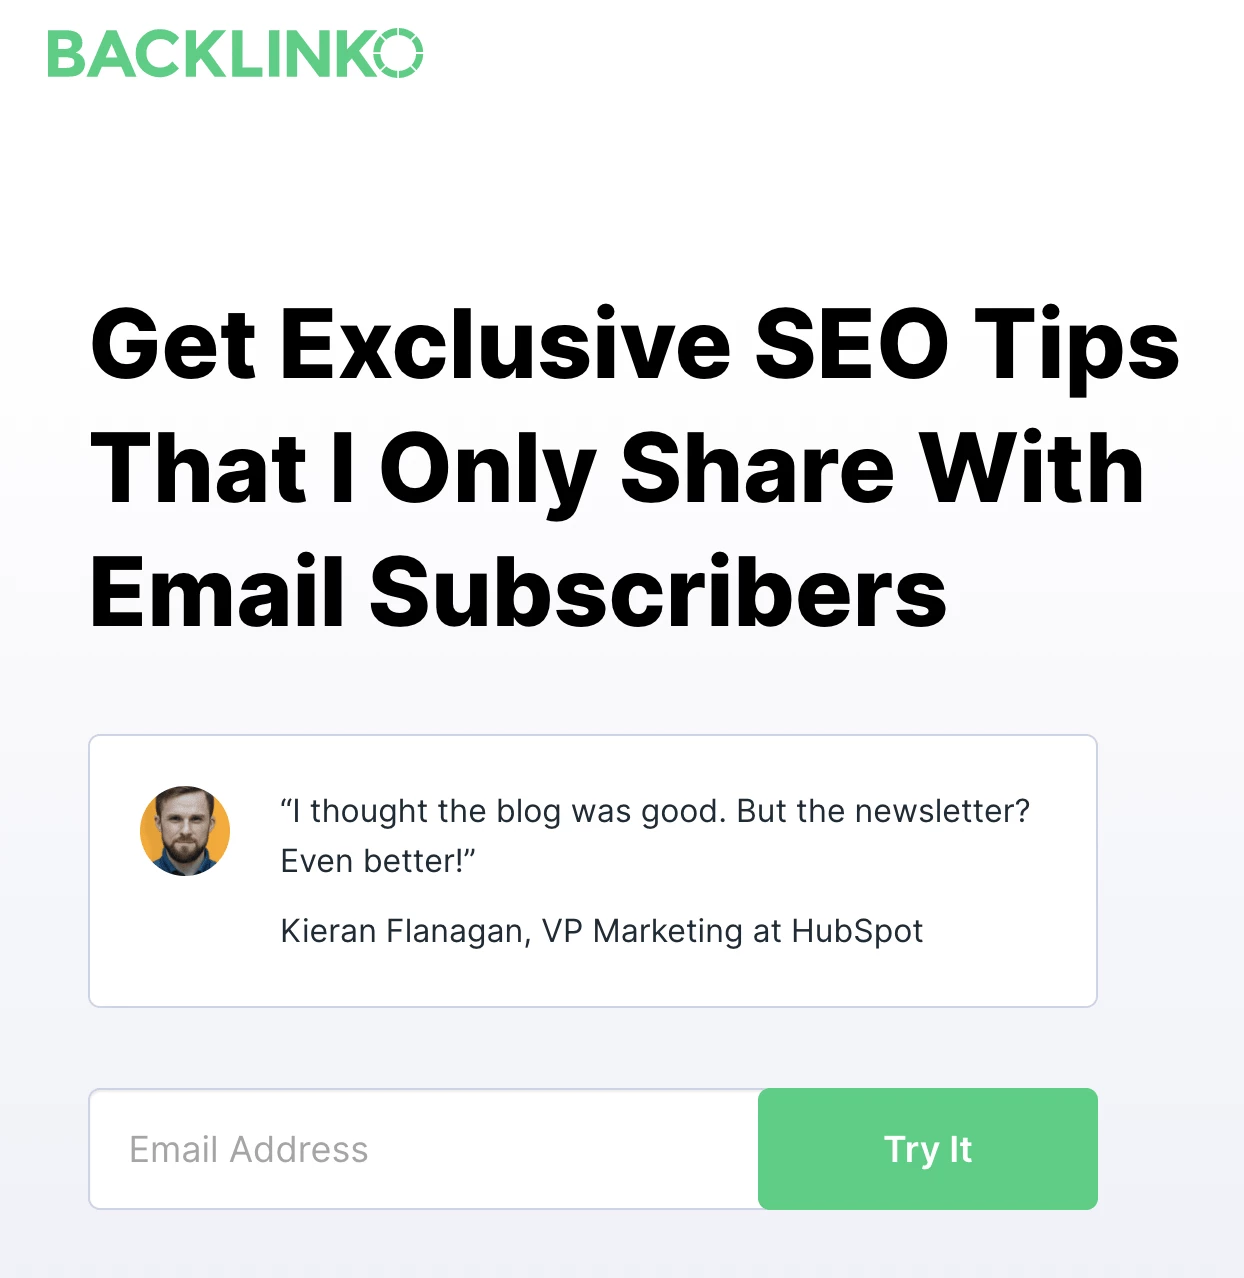 backlinko newsletter signup form with social proof